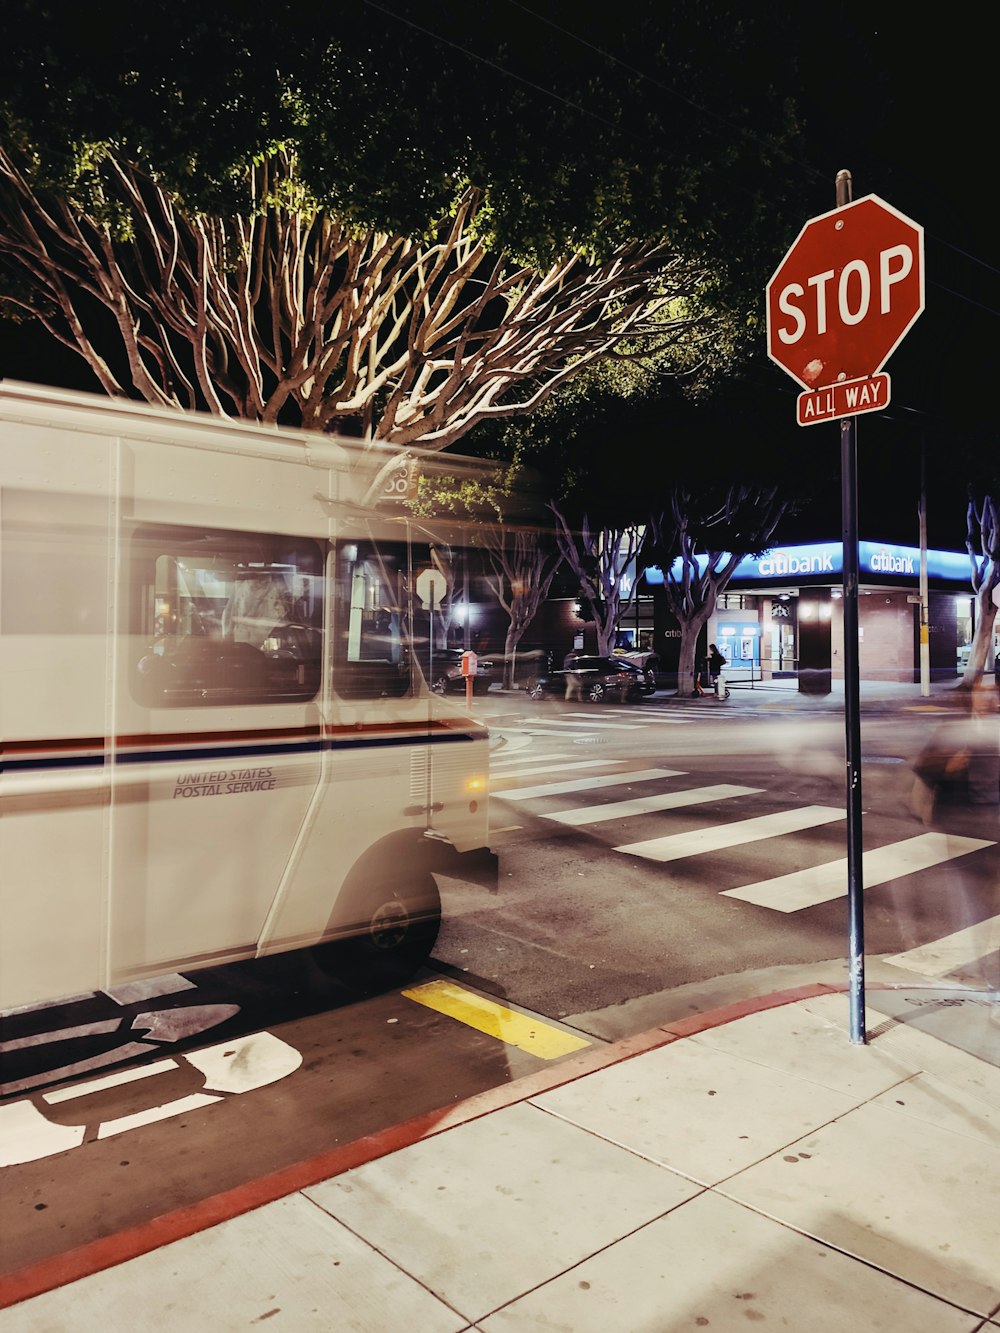 bus near stop sign